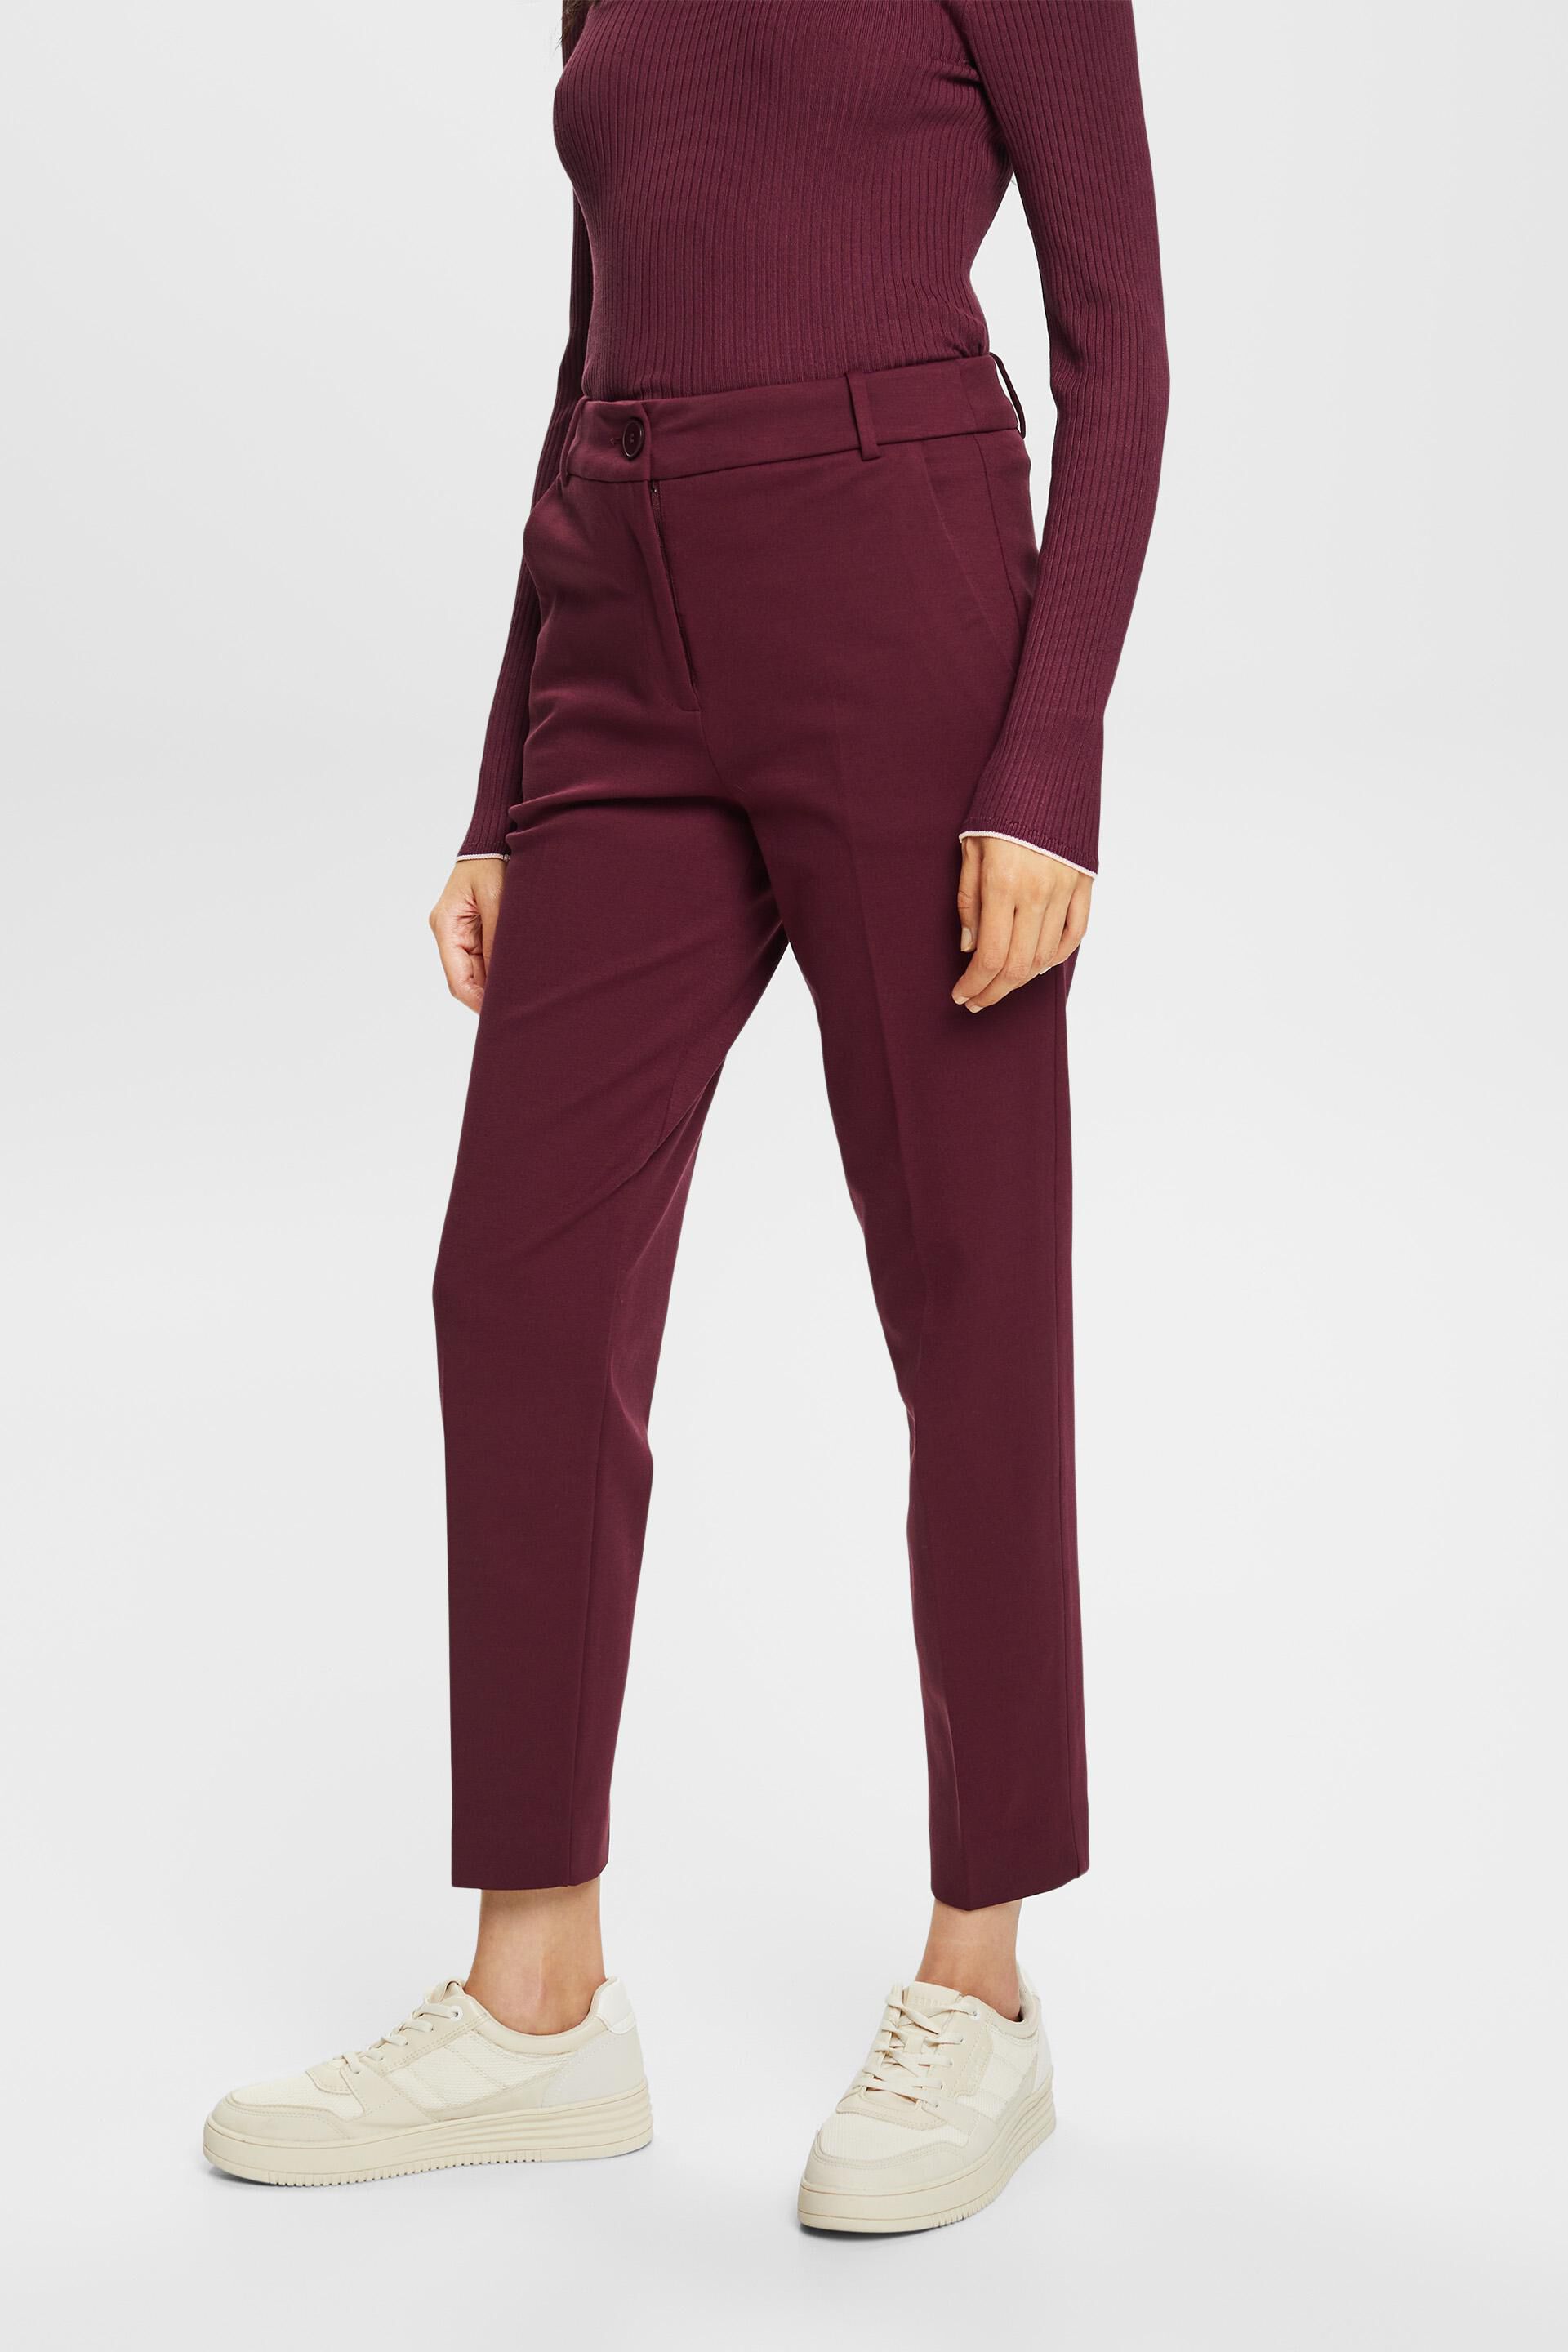 Esprit Damen SPORTY PUNTO mix & match tapered trousers